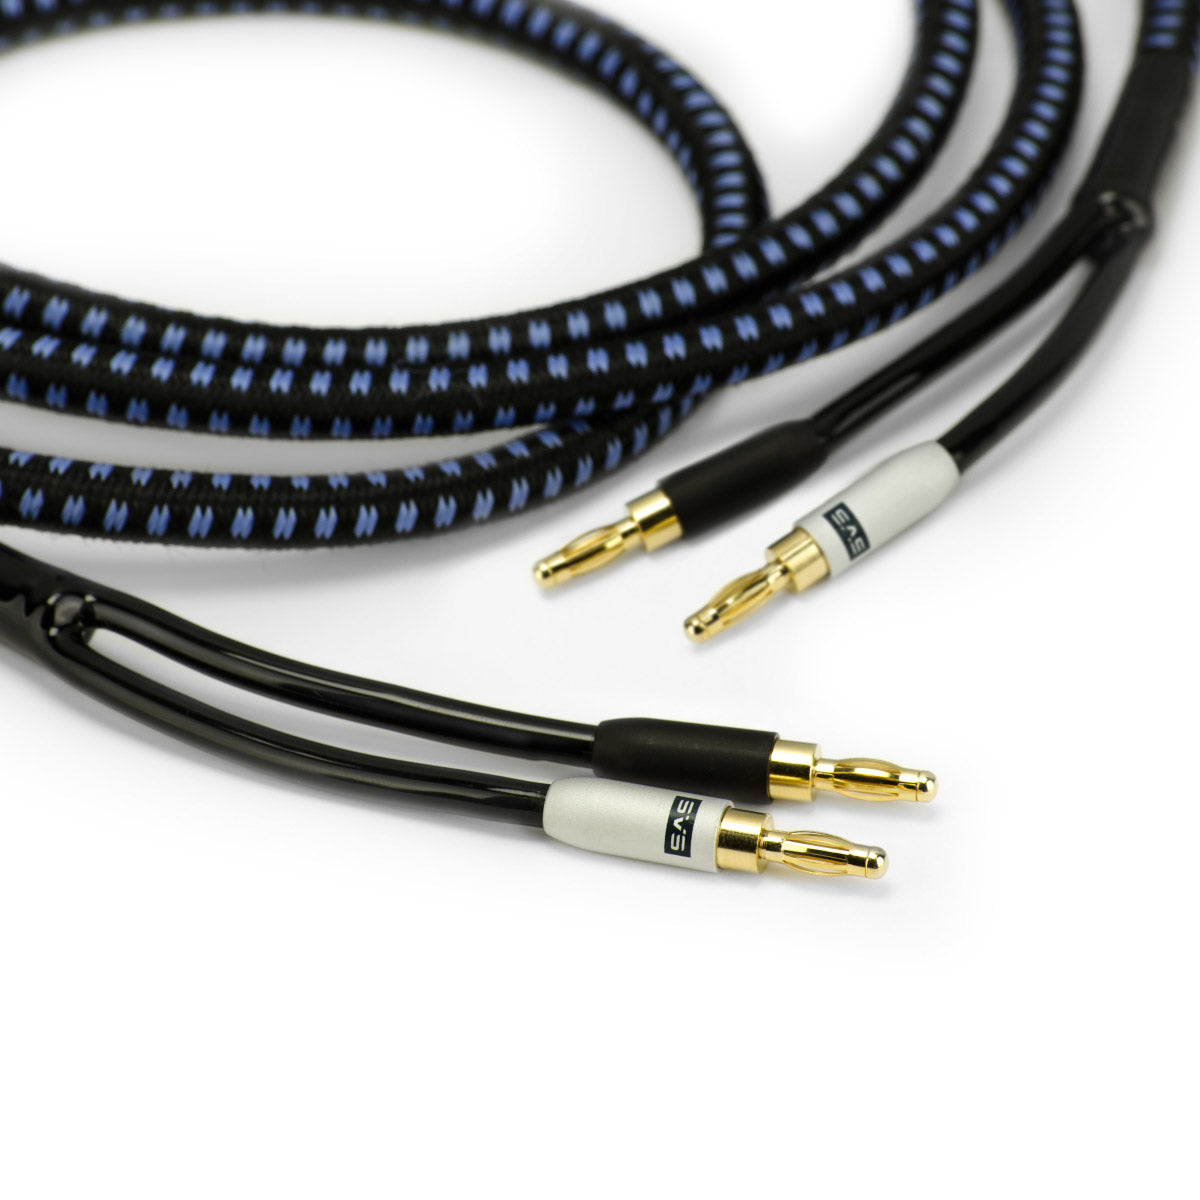 SVS SoundPath Ultra Speaker Cable - 25 ft. (7.62m) - Each